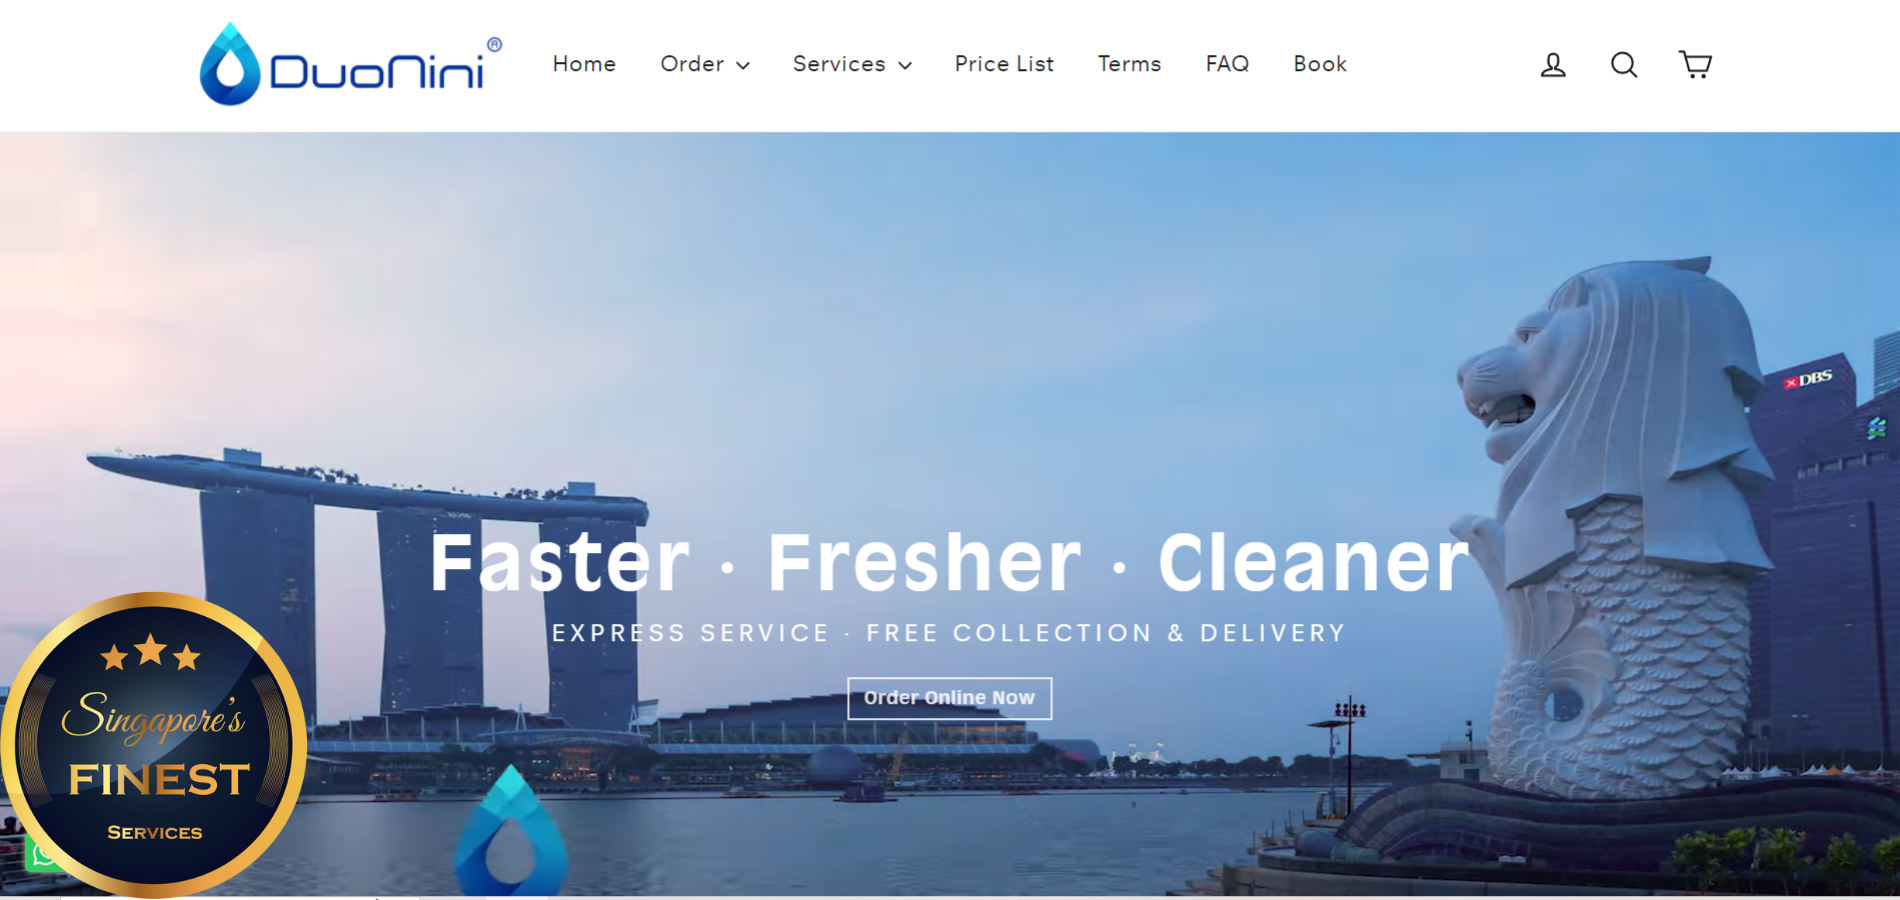 The Finest Curtain Cleaning Services in Singapore